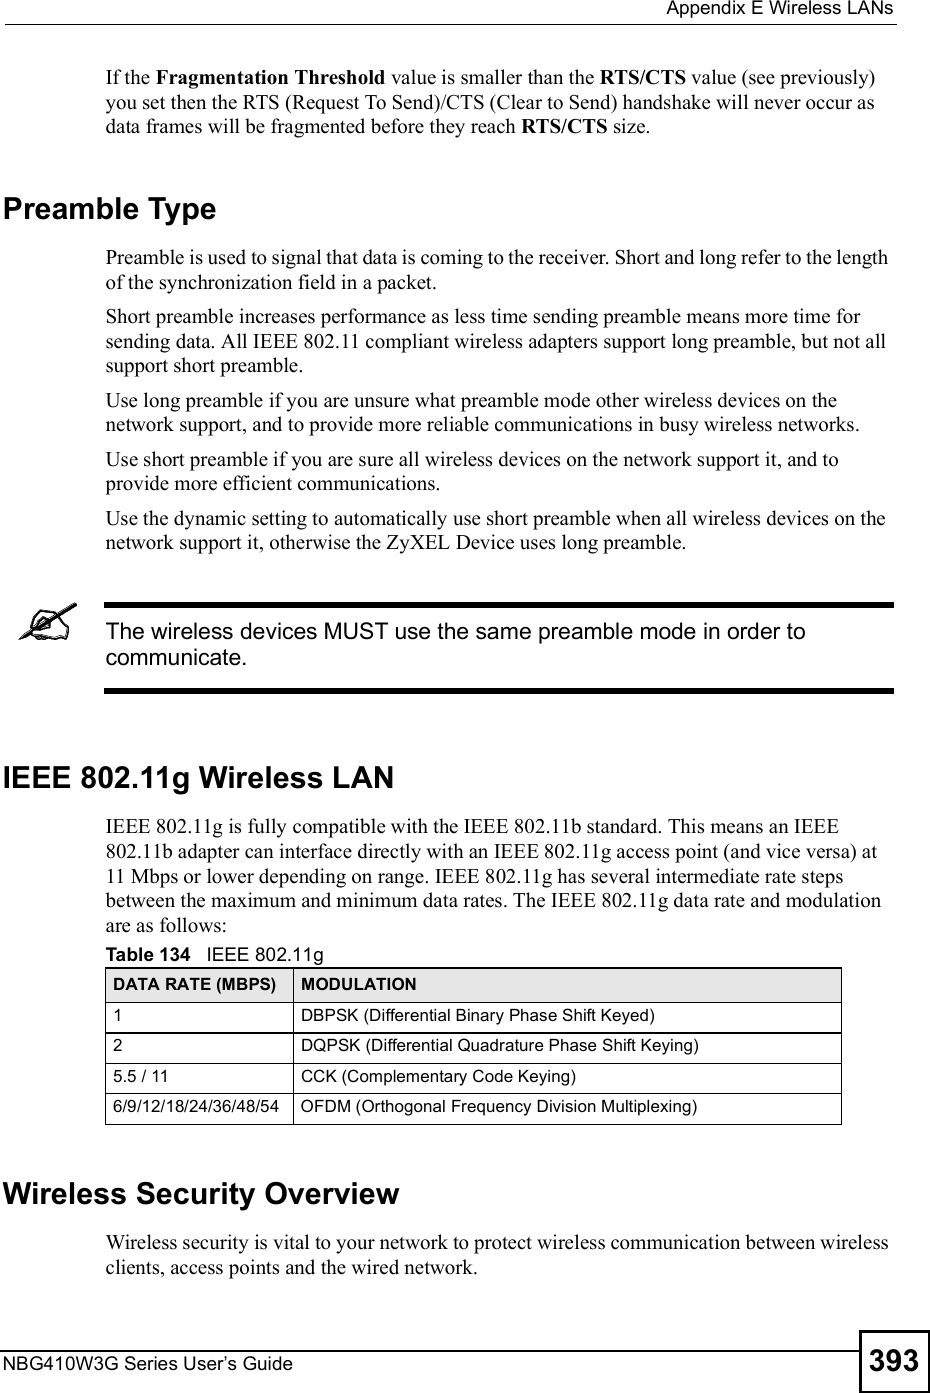  Appendix EWireless LANsNBG410W3G Series User s Guide 393If the Fragmentation Threshold value is smaller than the RTS/CTS value (see previously) you set then the RTS (Request To Send)/CTS (Clear to Send) handshake will never occur as data frames will be fragmented before they reach RTS/CTS size.Preamble TypePreamble is used to signal that data is coming to the receiver. Short and long refer to the length of the synchronization field in a packet.Short preamble increases performance as less time sending preamble means more time for sending data. All IEEE 802.11 compliant wireless adapters support long preamble, but not all support short preamble. Use long preamble if you are unsure what preamble mode other wireless devices on the network support, and to provide more reliable communications in busy wireless networks. Use short preamble if you are sure all wireless devices on the network support it, and to provide more efficient communications.Use the dynamic setting to automatically use short preamble when all wireless devices on the network support it, otherwise the ZyXEL Device uses long preamble.The wireless devices MUST use the same preamble mode in order to communicate.IEEE 802.11g Wireless LANIEEE 802.11g is fully compatible with the IEEE 802.11b standard. This means an IEEE 802.11b adapter can interface directly with an IEEE 802.11g access point (and vice versa) at 11 Mbps or lower depending on range. IEEE 802.11g has several intermediate rate steps between the maximum and minimum data rates. The IEEE 802.11g data rate and modulation are as follows:Wireless Security OverviewWireless security is vital to your network to protect wireless communication between wireless clients, access points and the wired network.Table 134   IEEE 802.11gDATA RATE (MBPS) MODULATION1DBPSK (Differential Binary Phase Shift Keyed)2DQPSK (Differential Quadrature Phase Shift Keying)5.5 / 11CCK (Complementary Code Keying) 6/9/12/18/24/36/48/54OFDM (Orthogonal Frequency Division Multiplexing) 